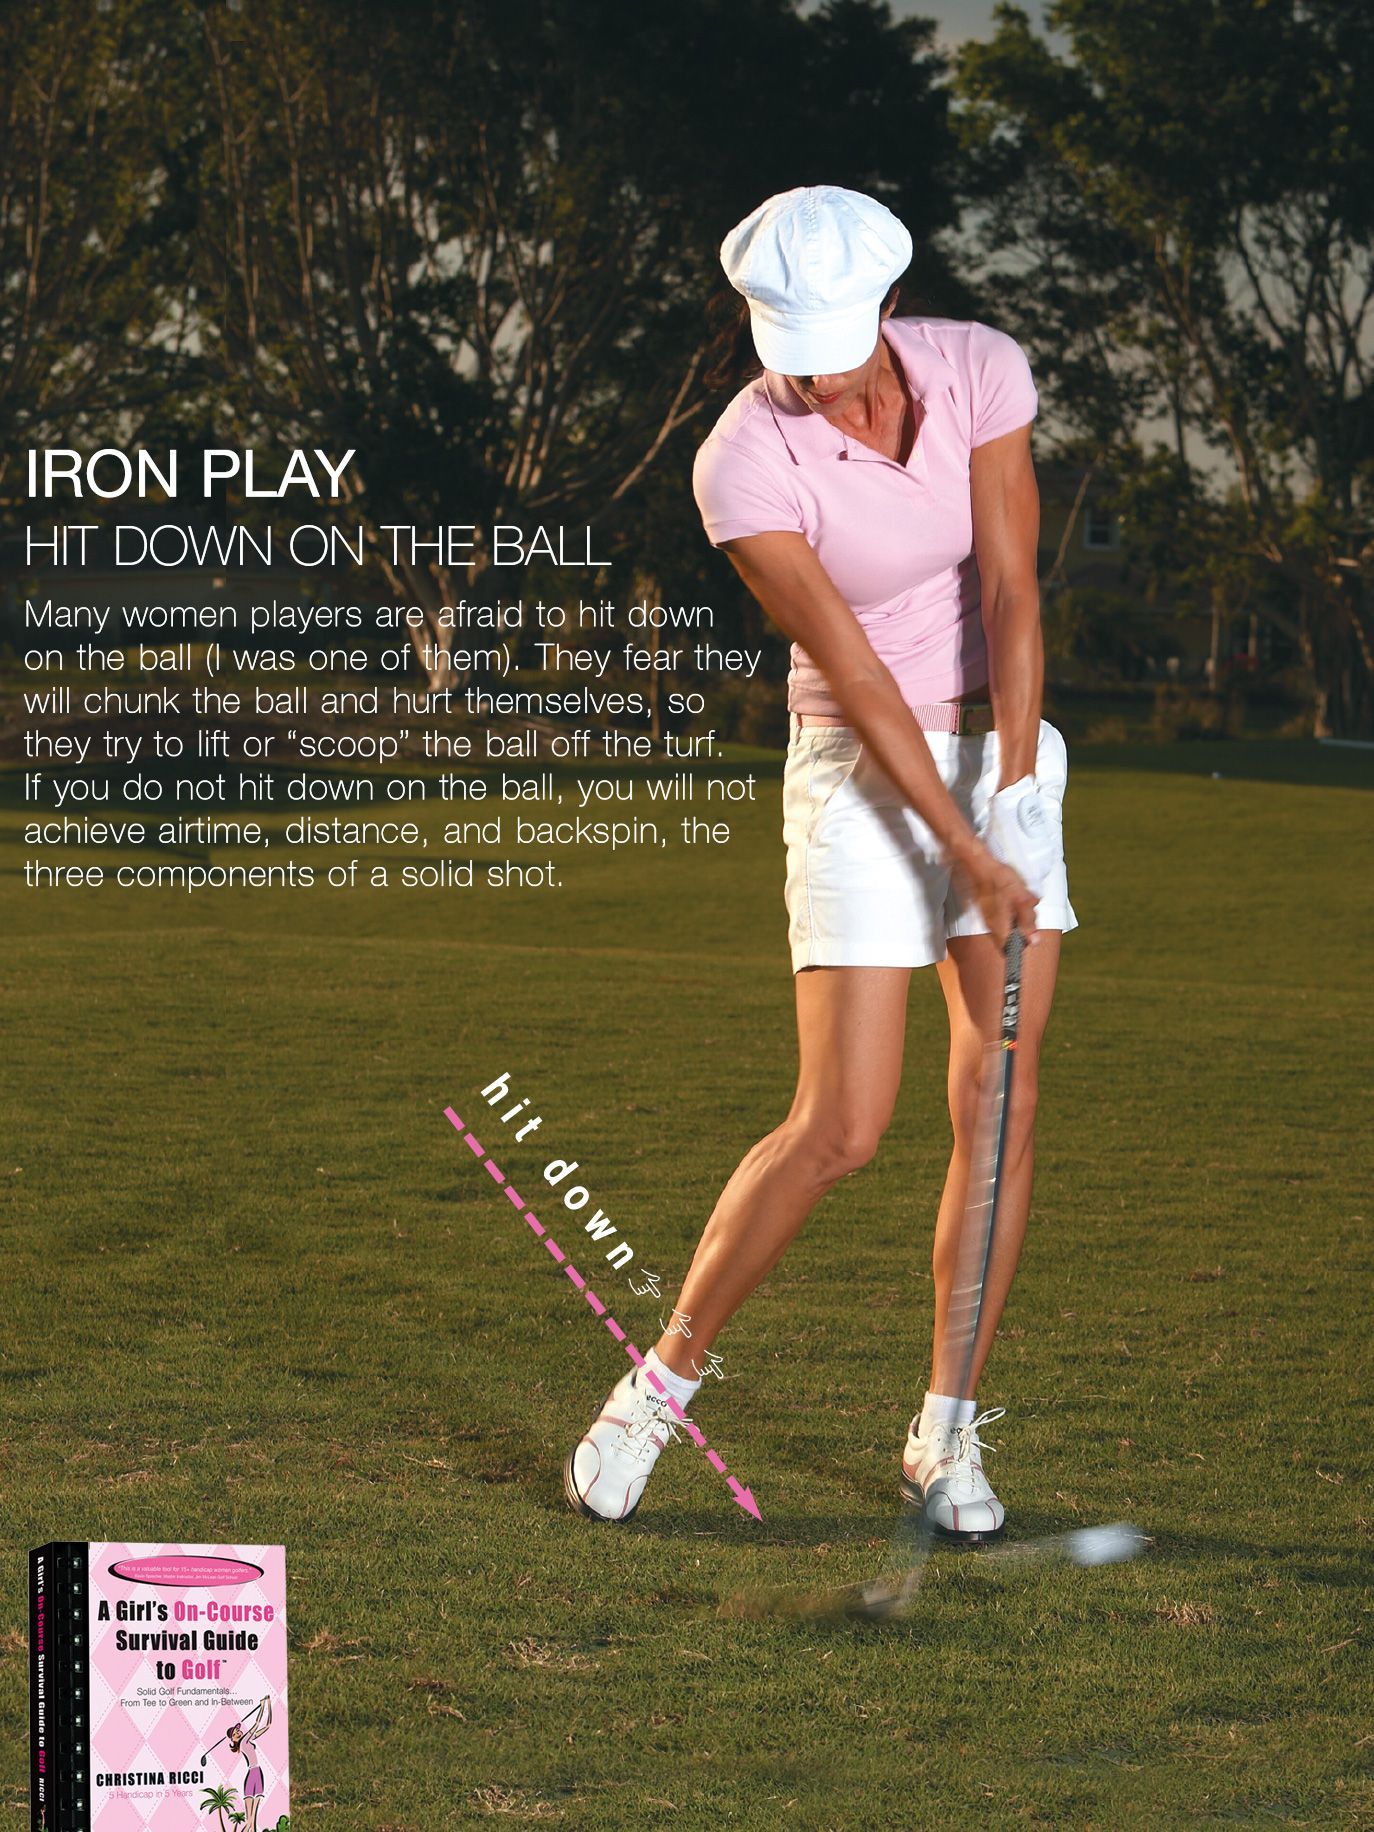 Player practicing golf photo